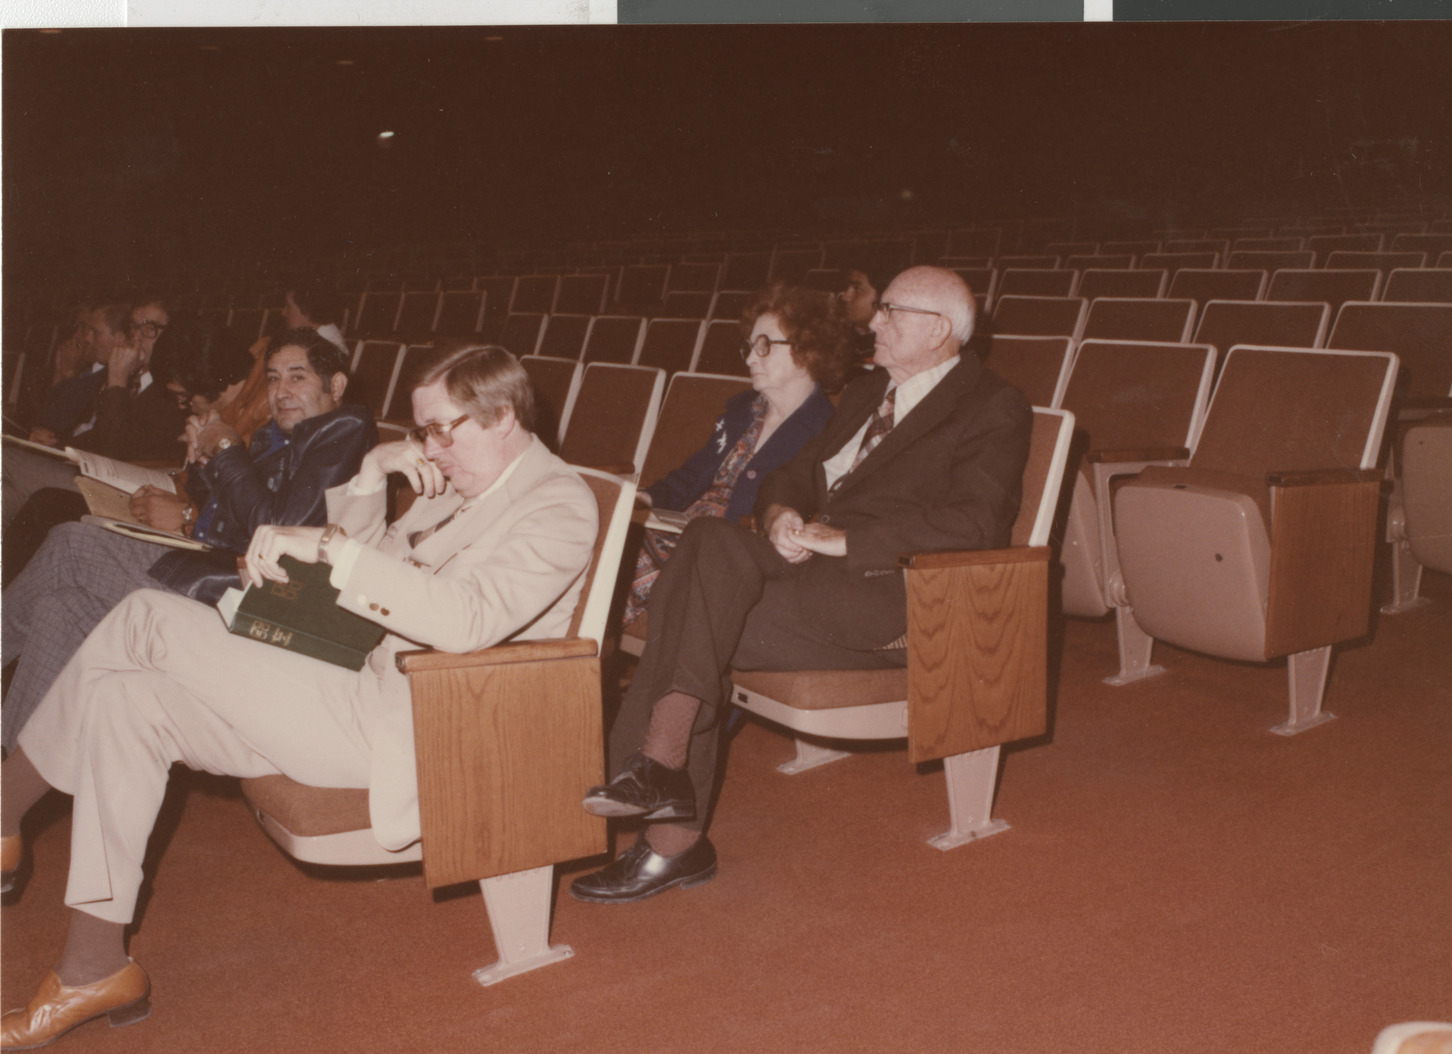 Photograph of people seated in an auditorium, circa 1978